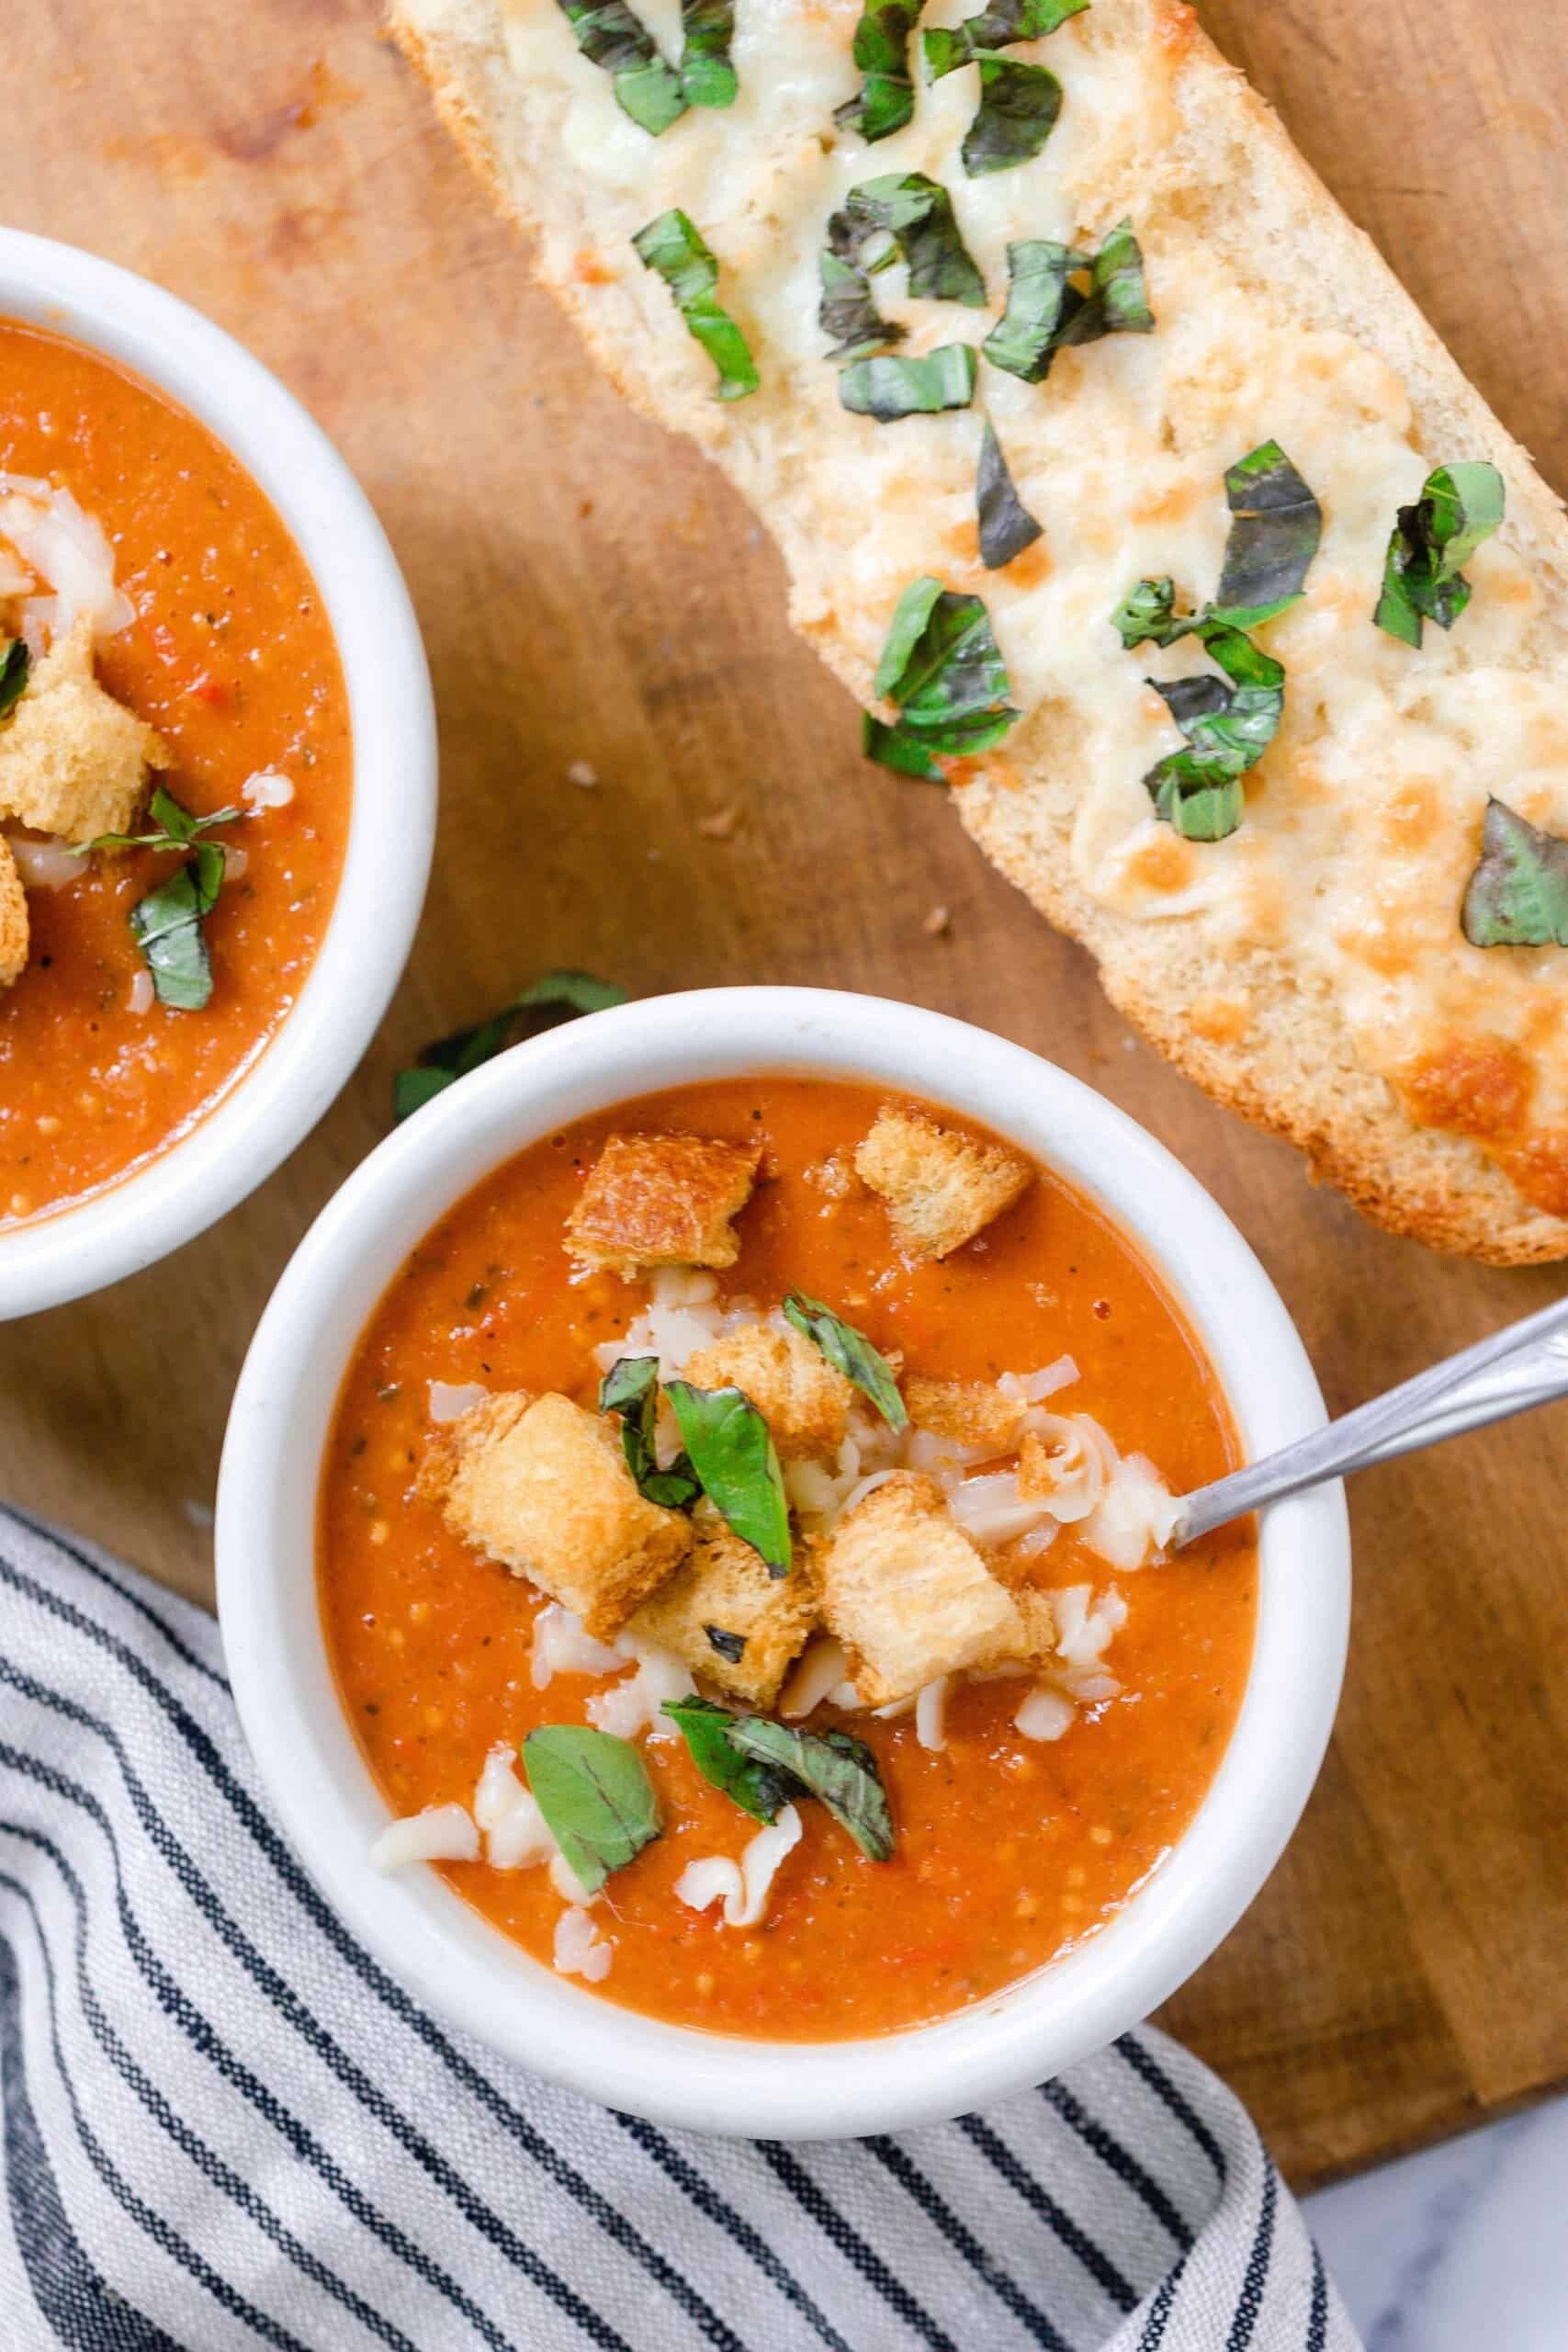 The Best Fresh Tomato Soups to Make with Homegrown Tomatoes